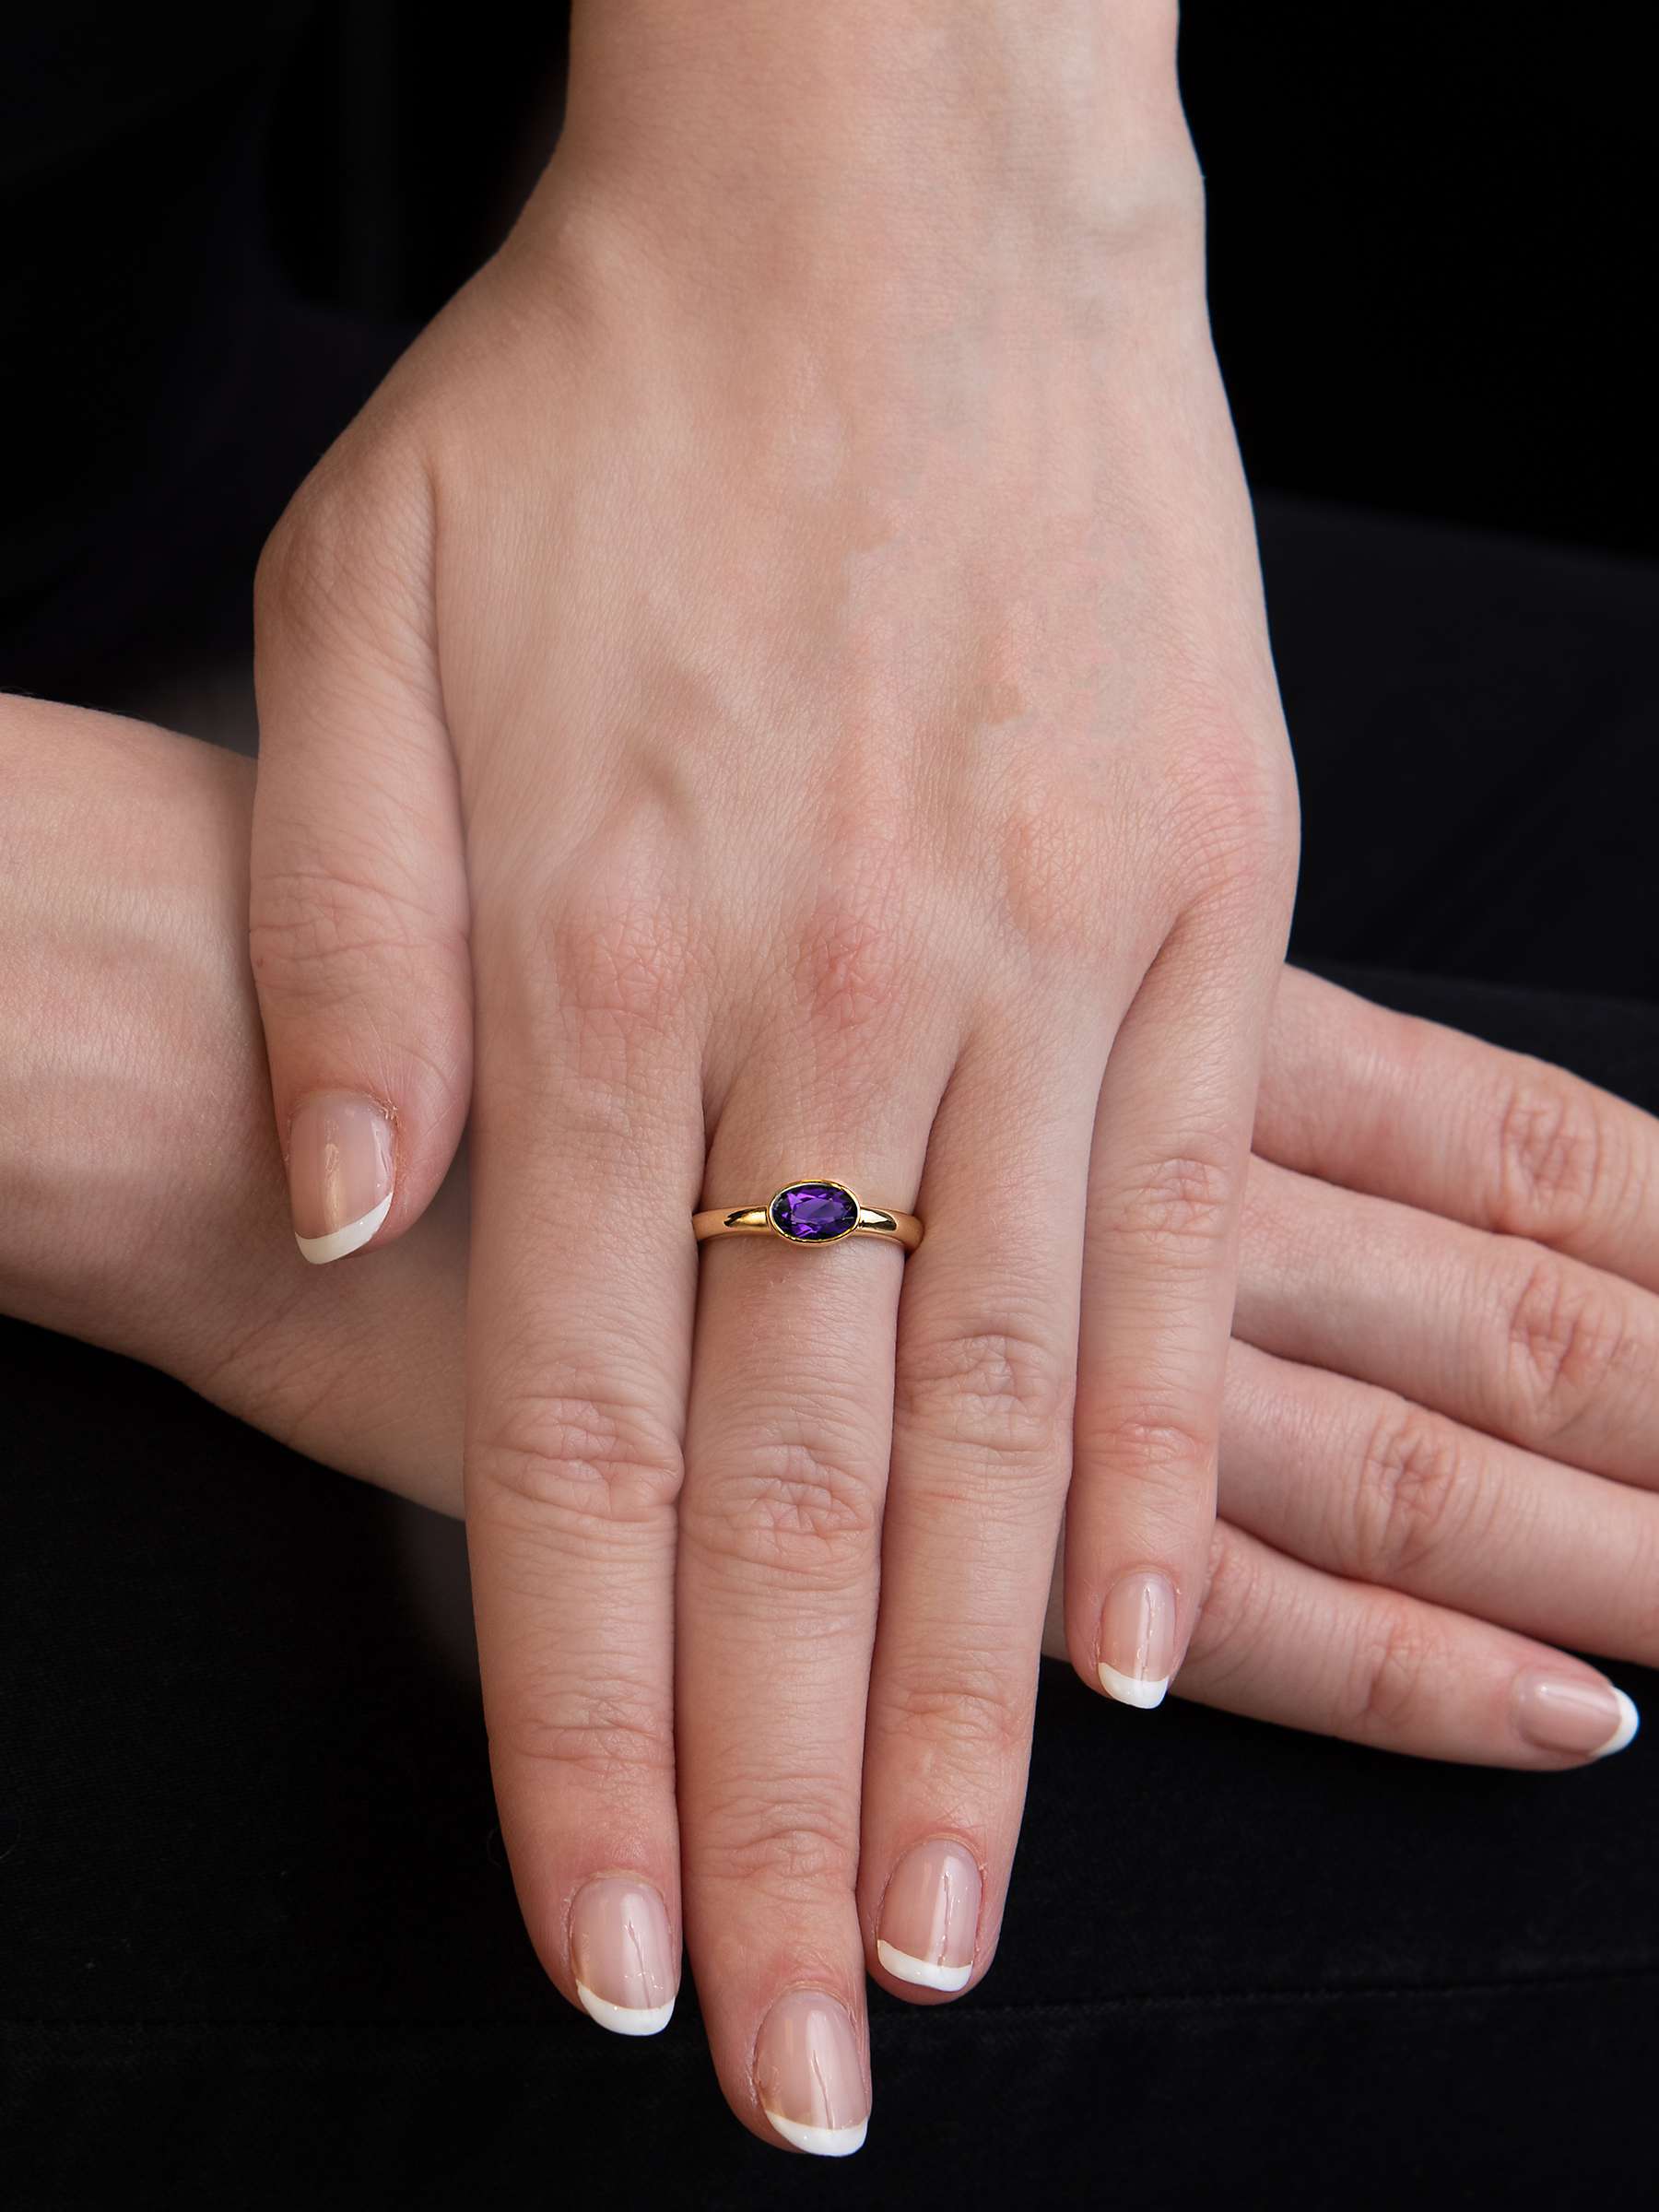 Buy E.W Adams Oval Amethyst Ring, Gold/Purple Online at johnlewis.com